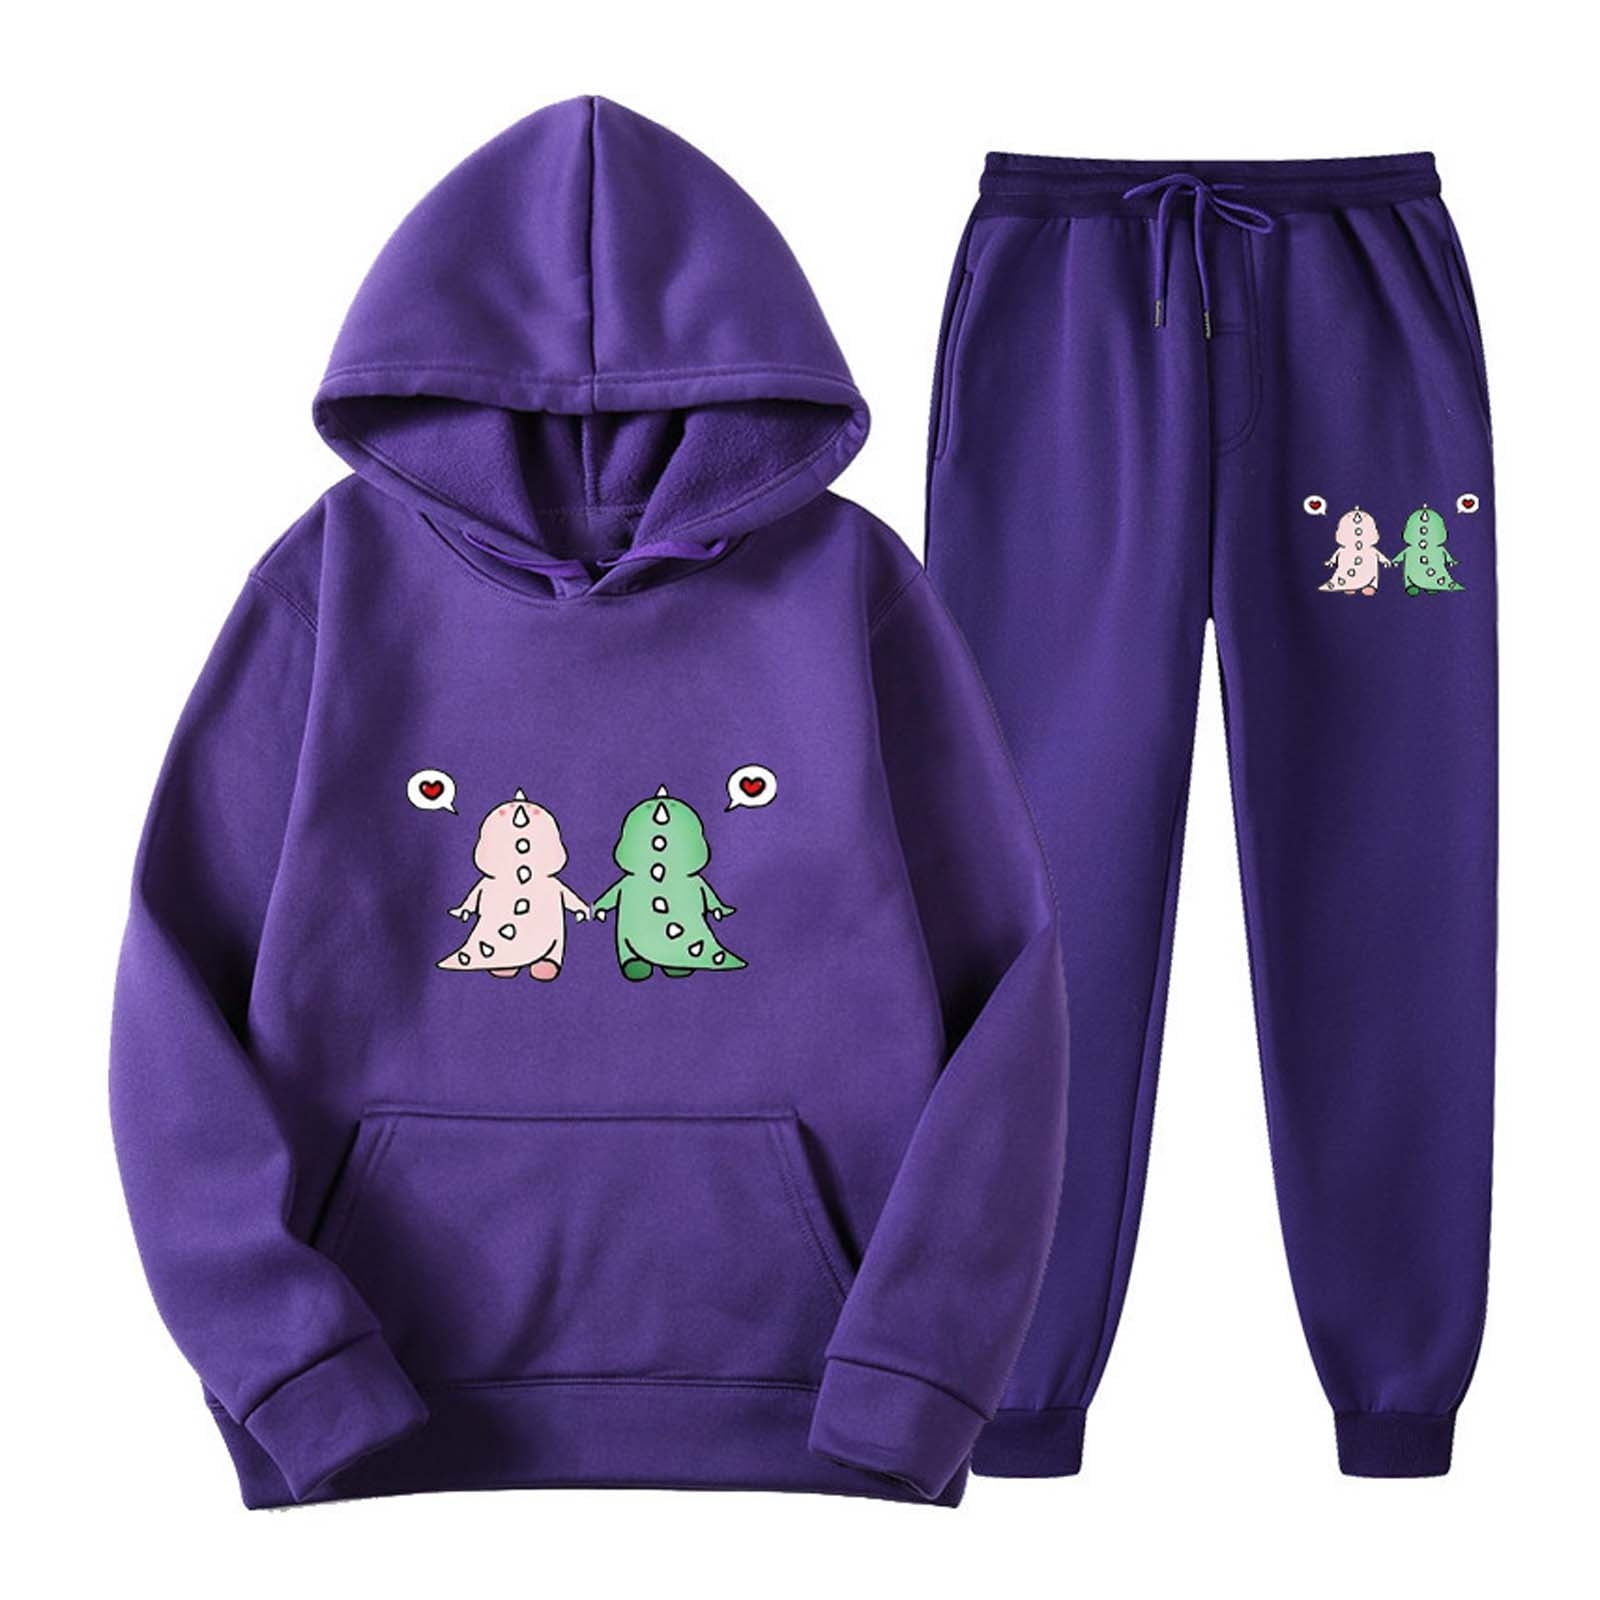 Dinosaur with Lounge Sweatpants Hoodie Women Suit Pullover Pockets RQYYD Sweatshirt Piece Two L Sets Reduced Kangaroo Outfits Purple Sweatsuits Set for